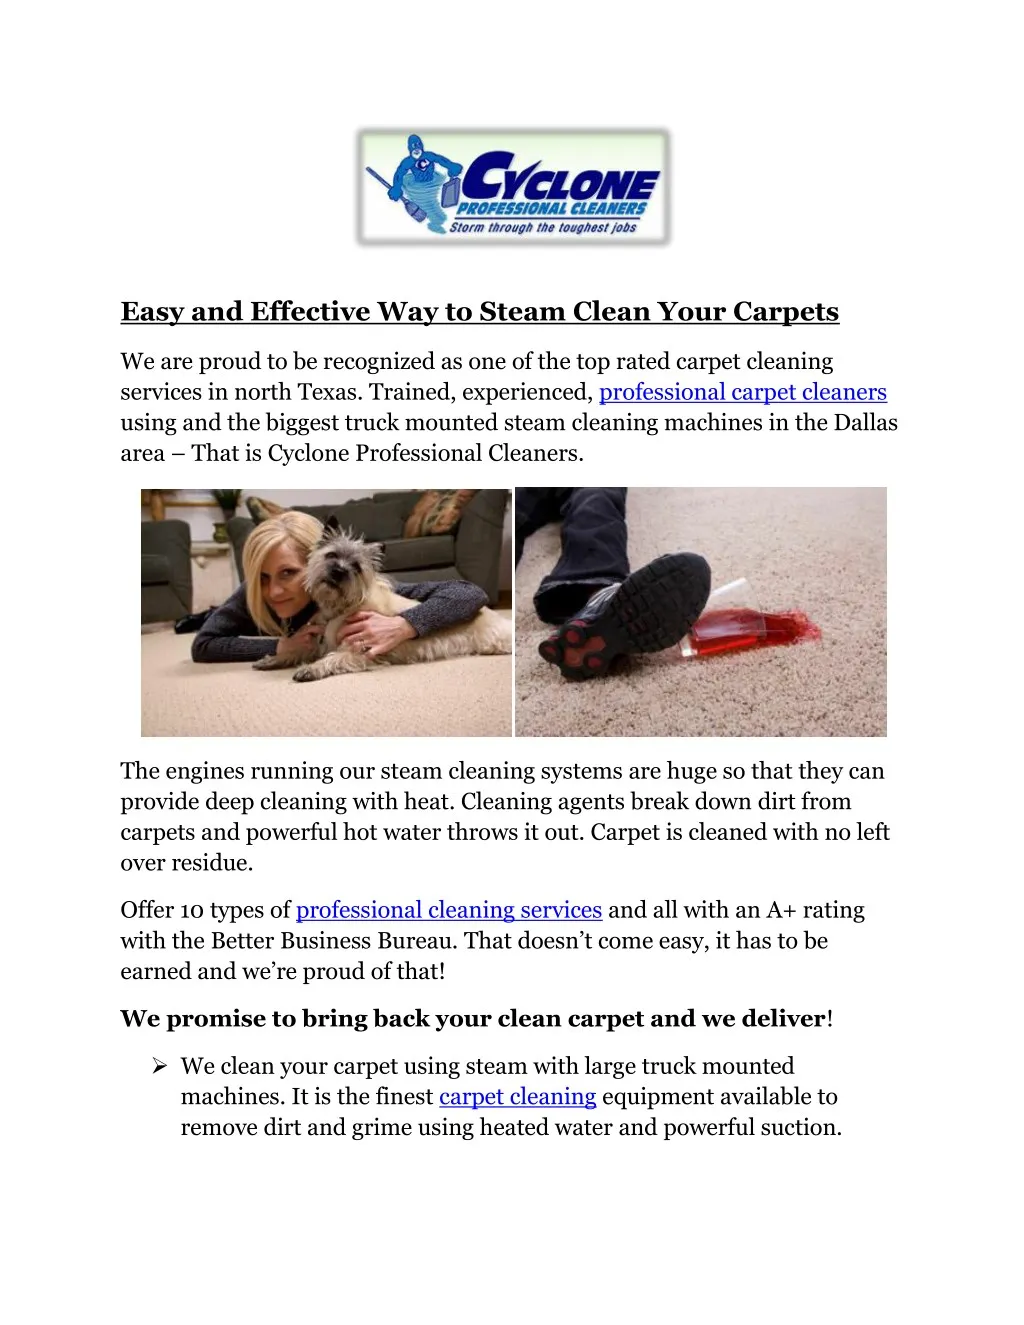 easy and effective way to steam clean your carpets